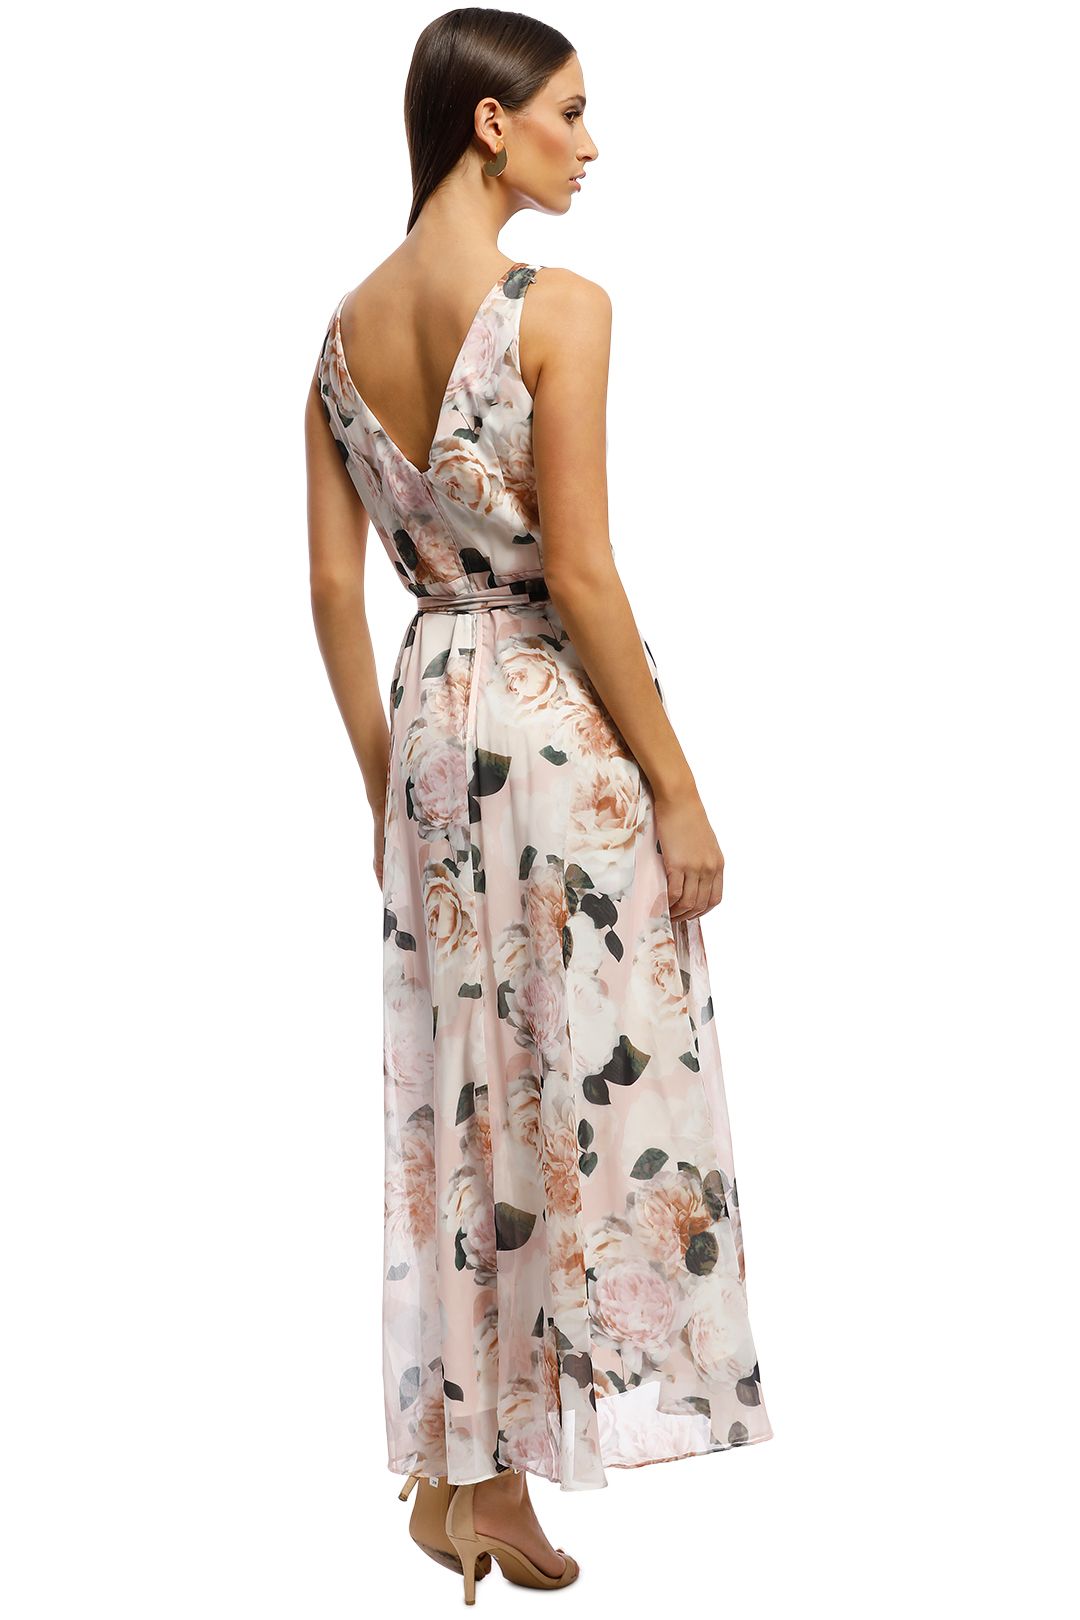 Rosie Print Chiffon Dress by Montique for Hire